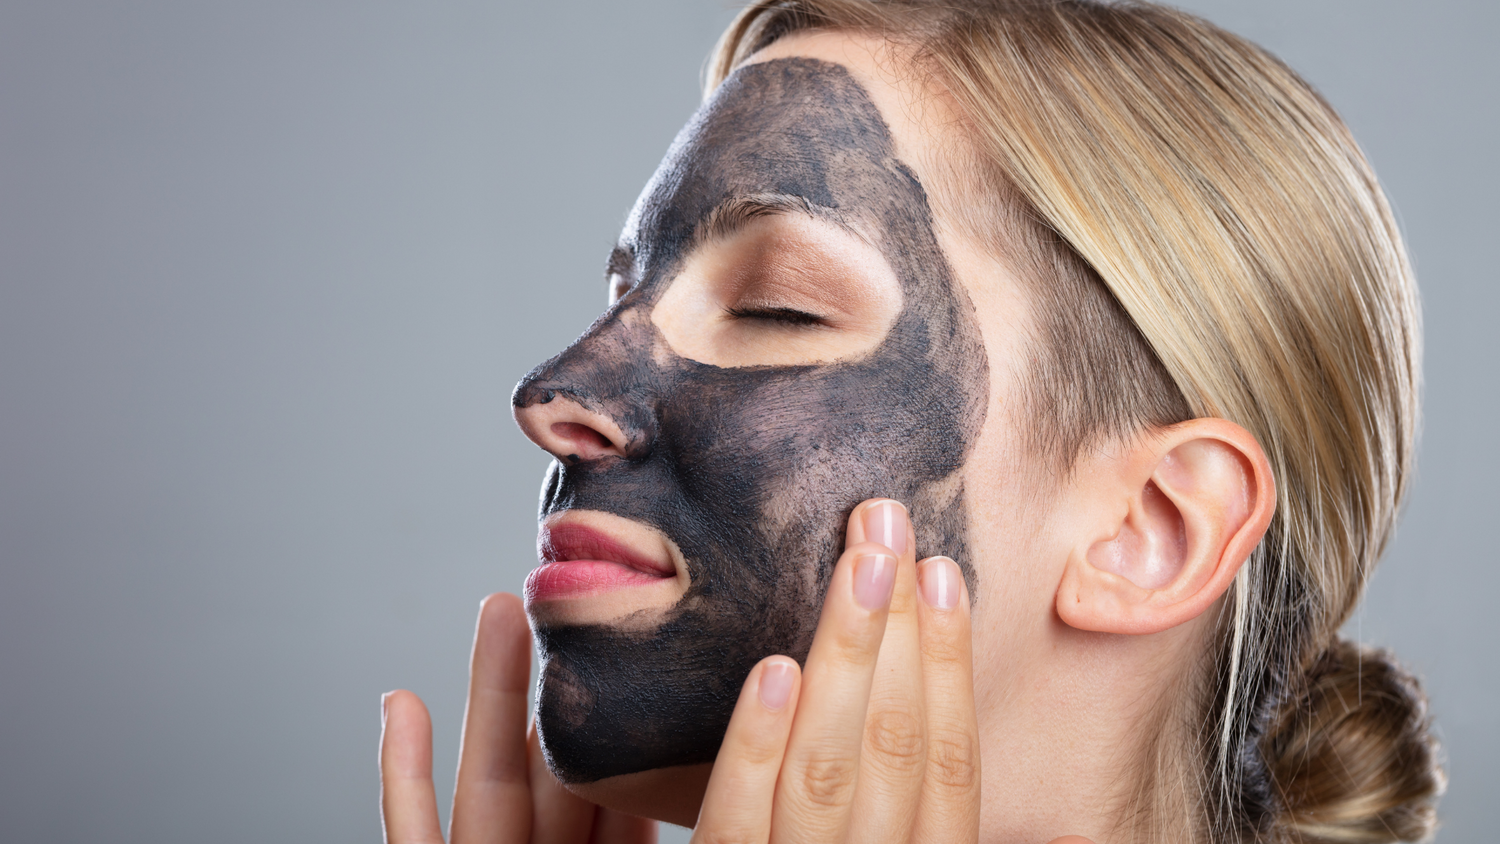 Homemade vs. professional product - how good are DIY masks?